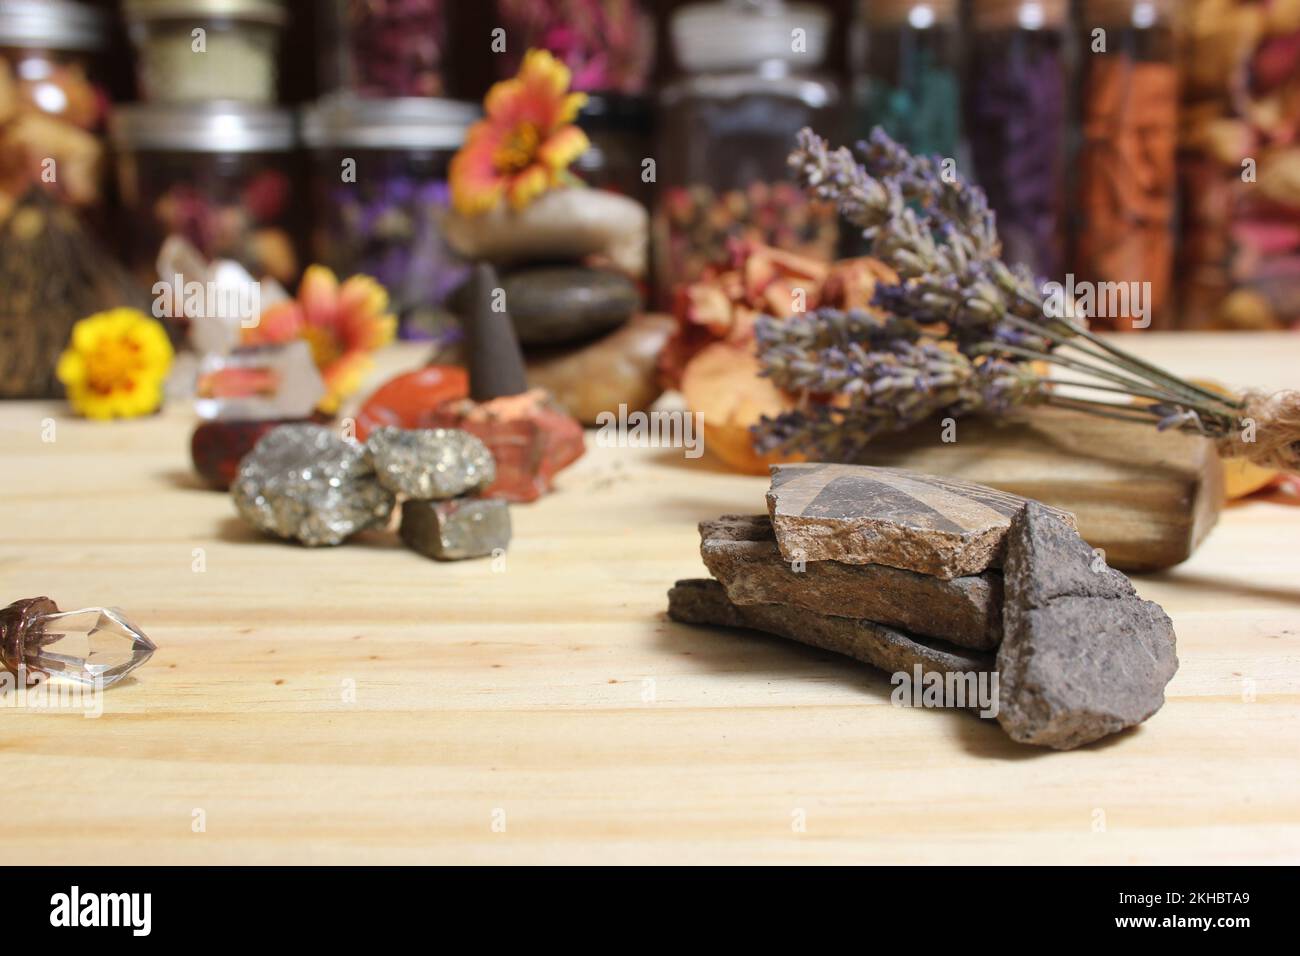 Ancient Native American Pottery Pieces With Crystals and Flowers on Meditation Altar Stock Photo